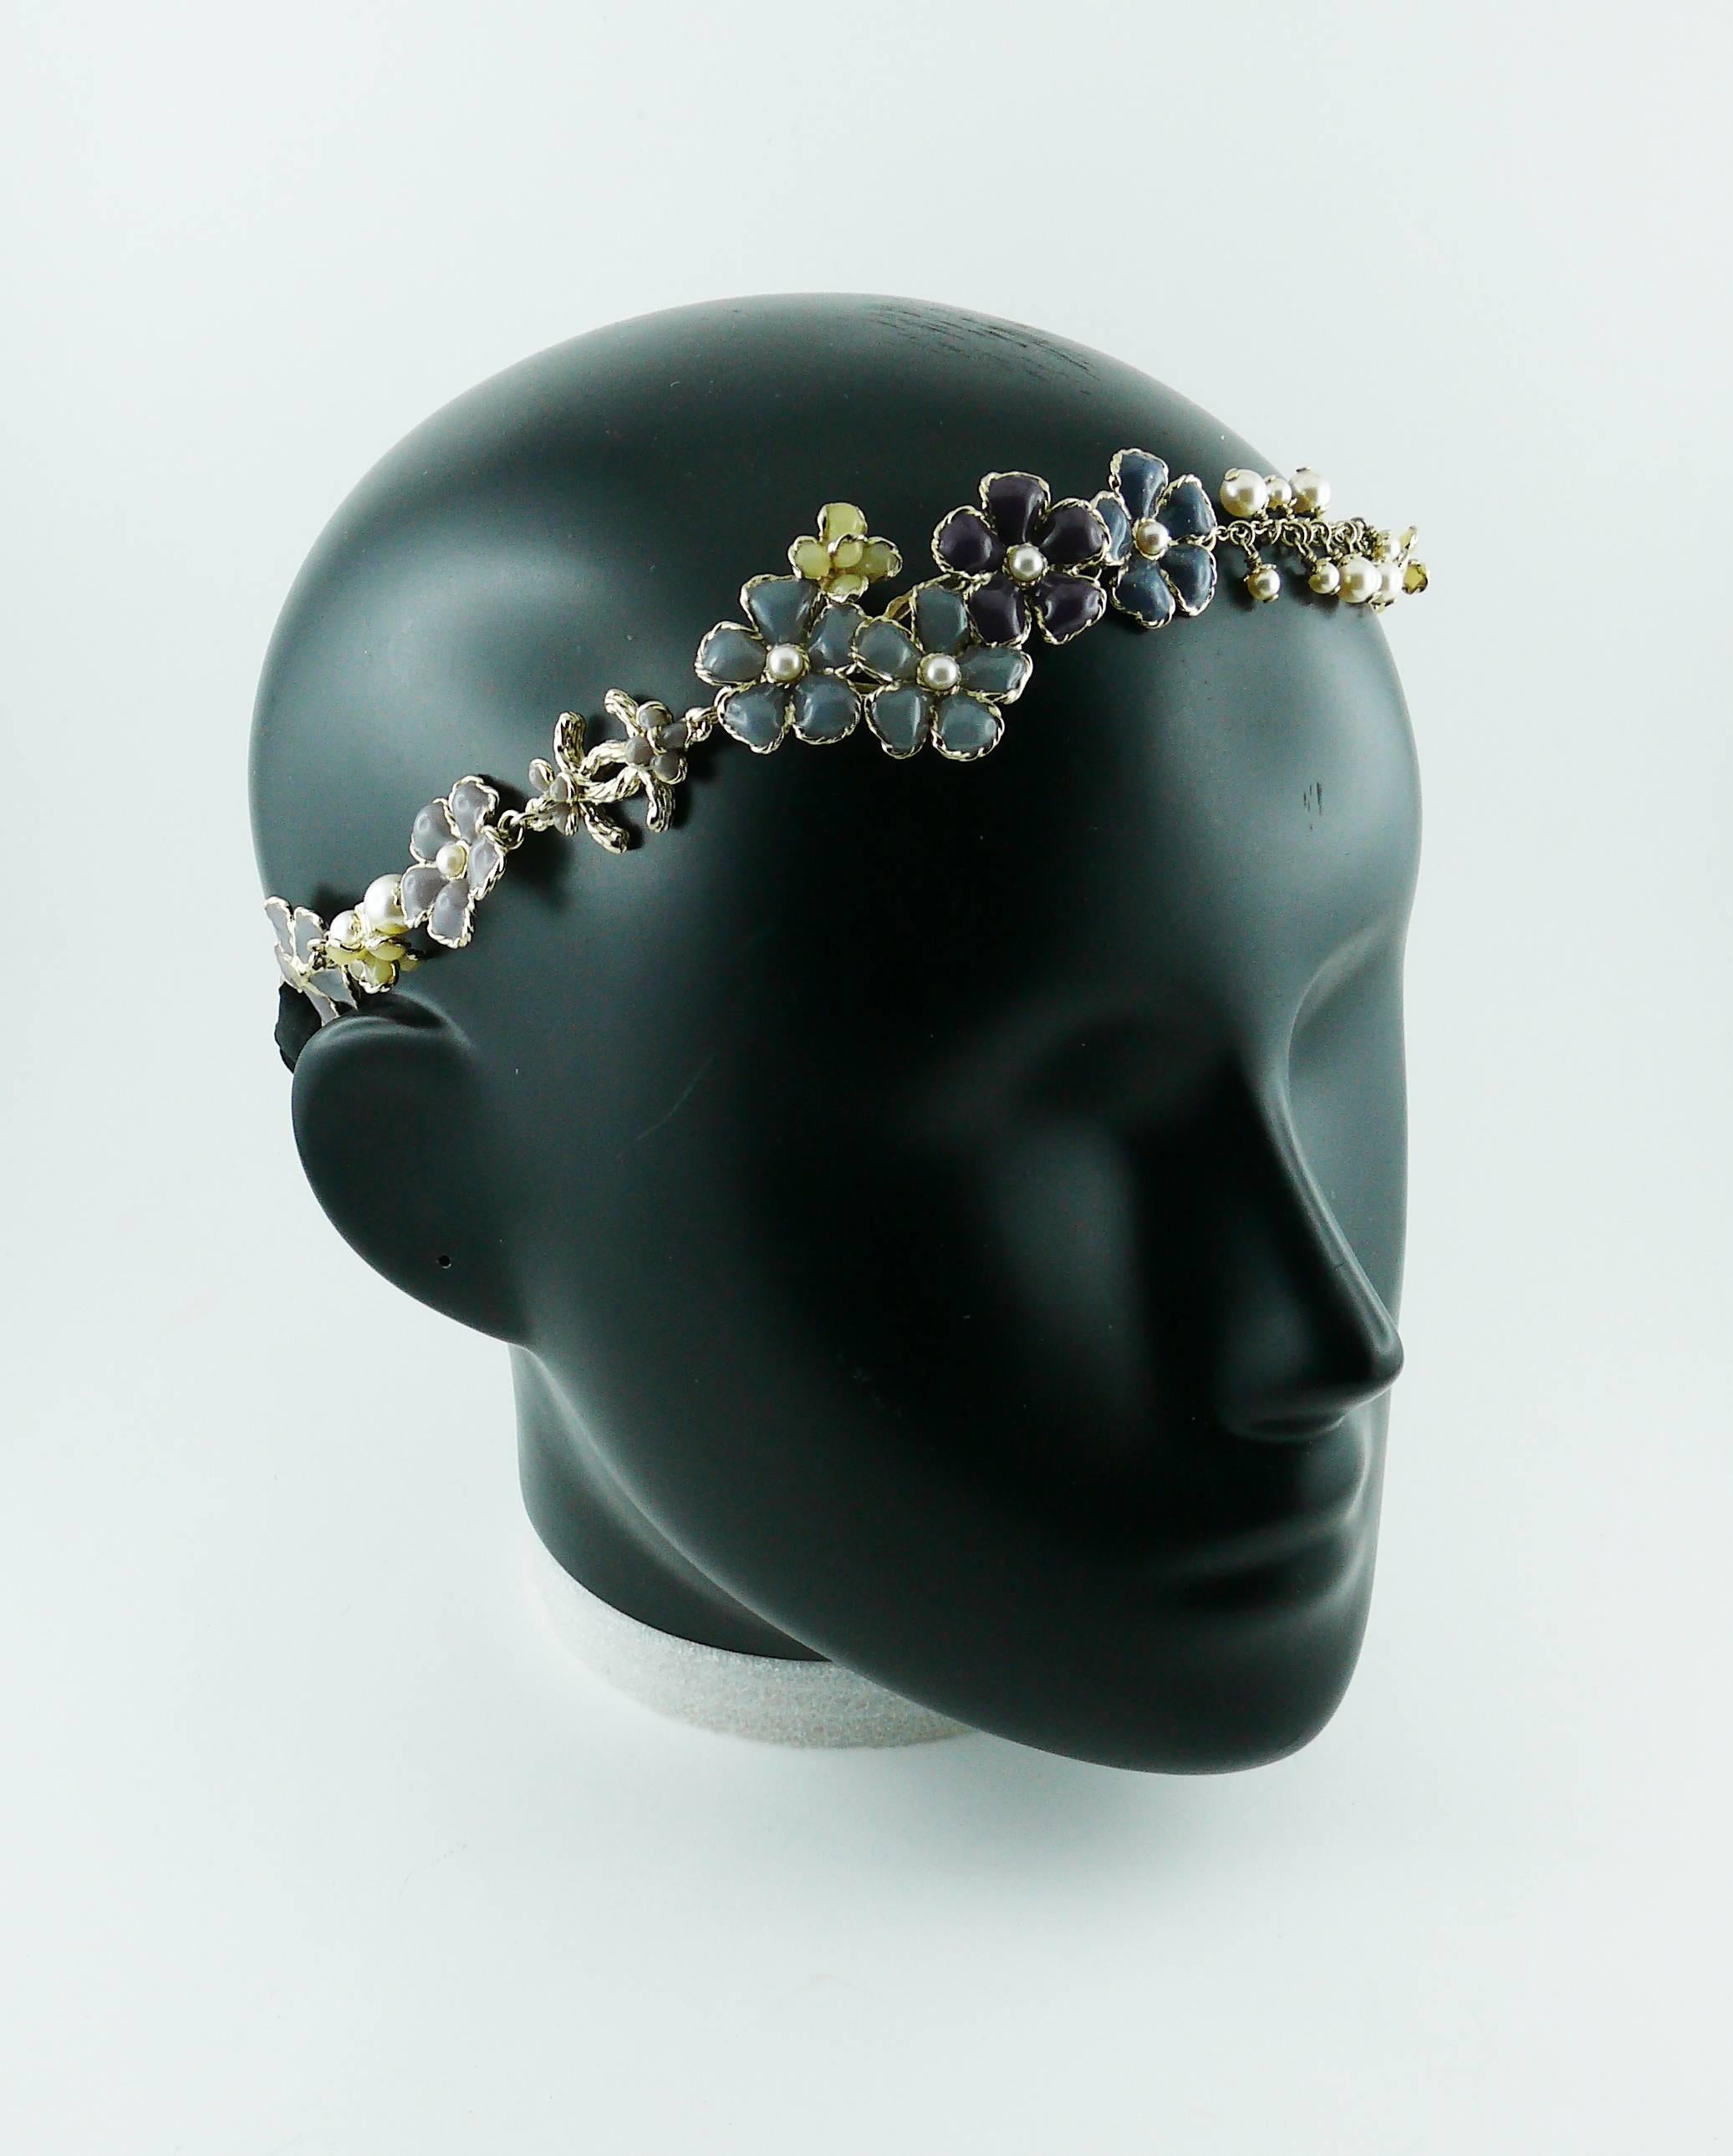 CHANEL rare and gorgeous headband featuring CC logo, muticolored flowers and faux pearls in a very pale gold toned setting.

Cruise Collection 2012-2013.

Marked CHANEL A12 C Made in France.
"S" mark for private sale (invisible when